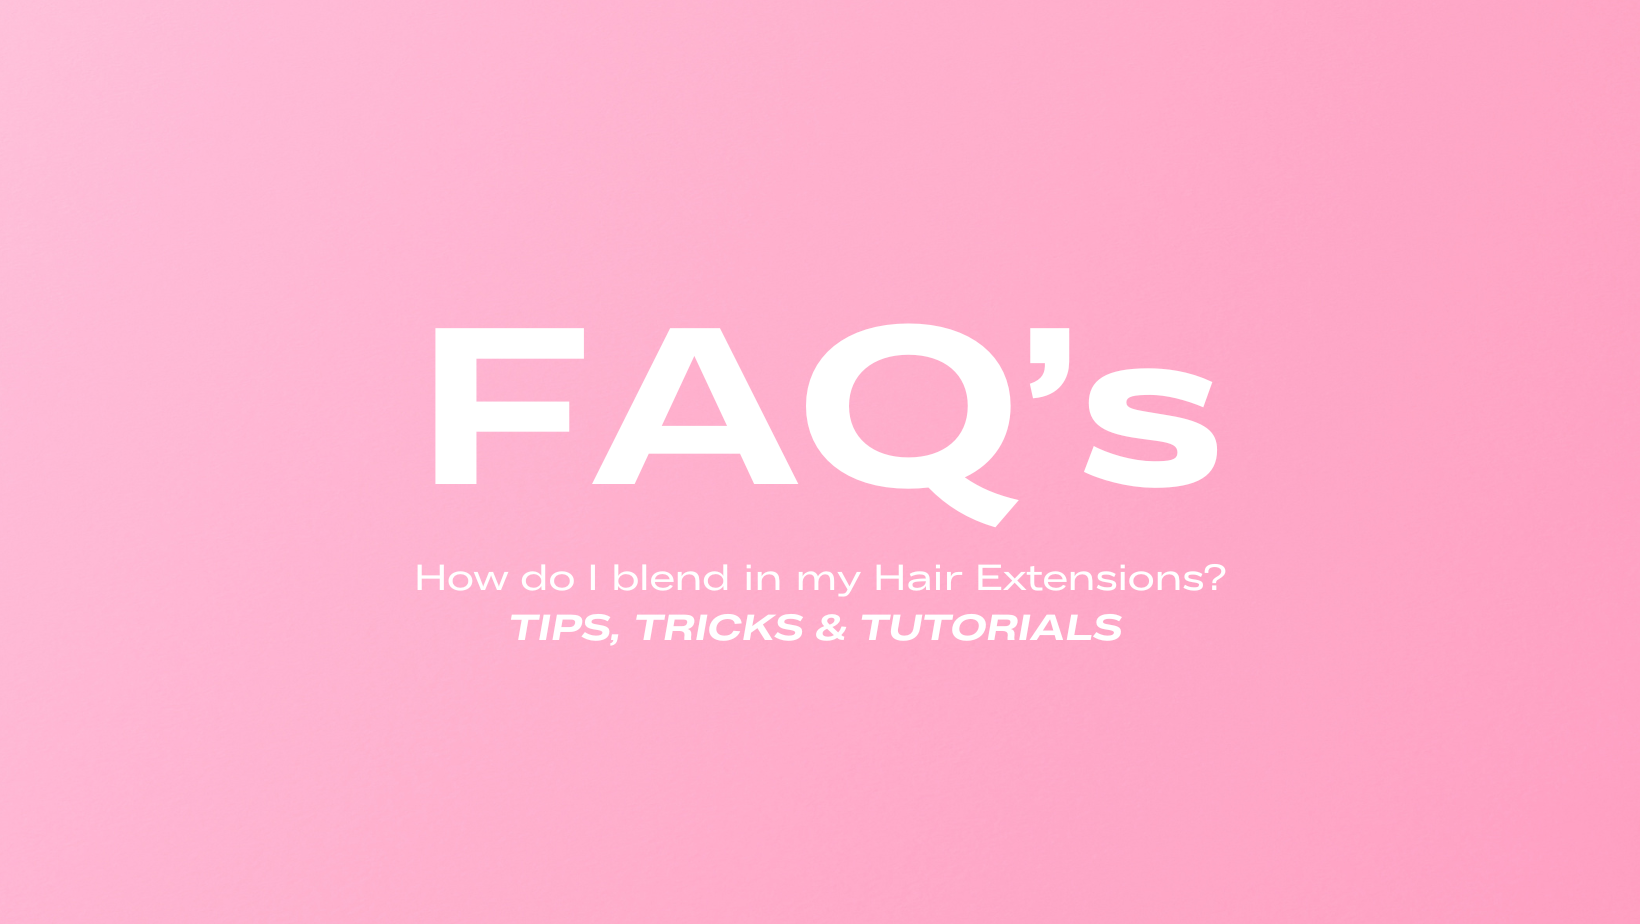 How do I blend in my hair extensions?